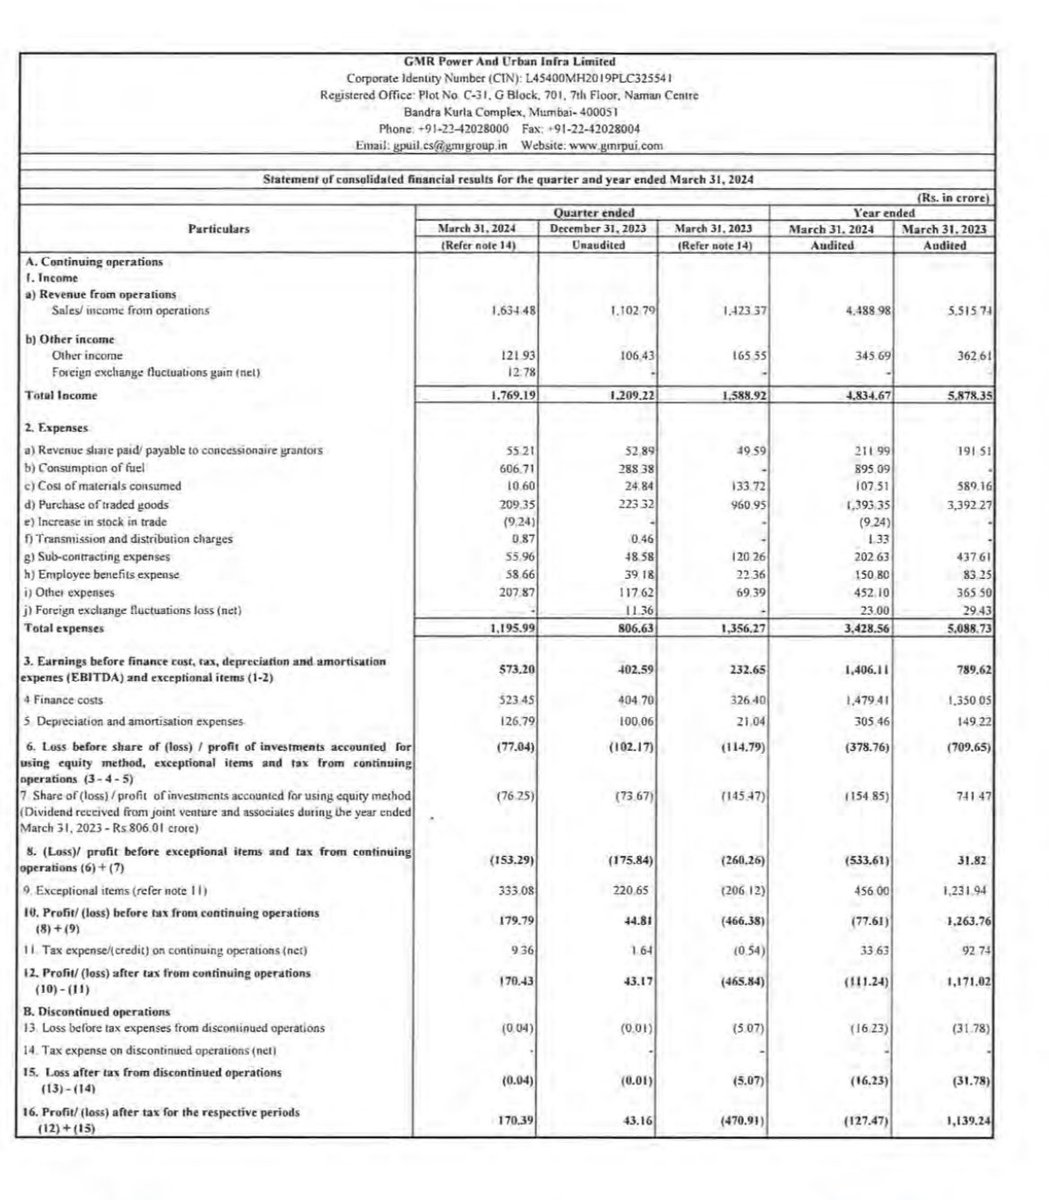 SOLID SET OF Q4FY24 RESULTS HAVE BEEN REPORTED BY GMR POWER & URBAN 🔥🔥🔥

Q4FY24 Net Profit Of 170 CR 
VS 
Q3FY24 Net Profit Of 43 CR 
VS 
Q4FY23 Loss Of 471 CR 

HIGHEST EVER QUARTERLY EBITDA 🔥
MASSIVE TURNAROUND 
Valuation wise undervalued at a forward PE of just 6